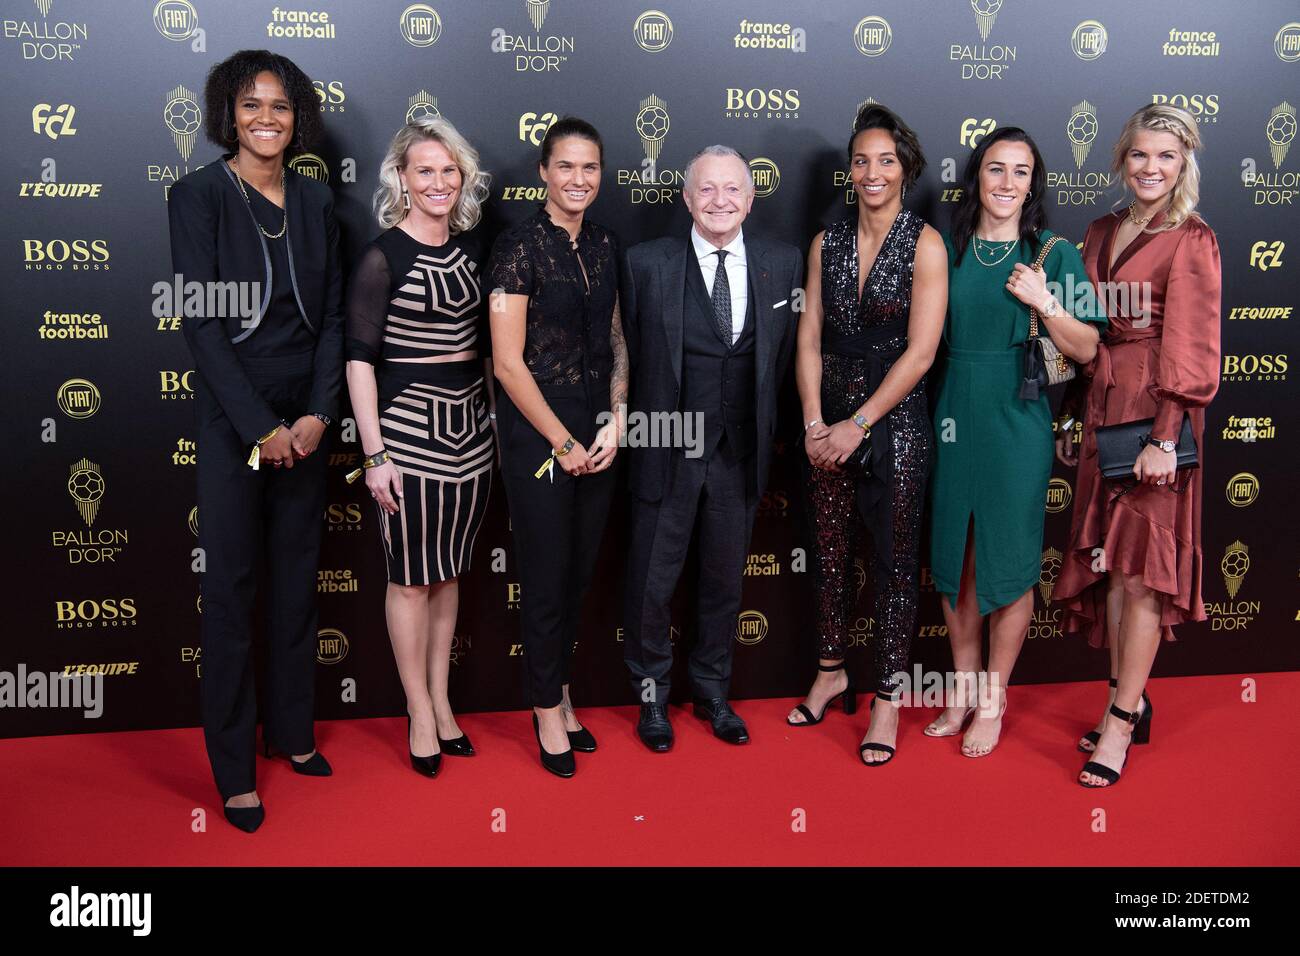 Olympique Lyon players (L-R) Wendie Renard, Amandine Henry, Dzsenifer  Marozsan, President of Olympique Lyon Jean-Michel Aulas, Sarah Bouhaddi,  Lucy Bronze, and Ada Hegerberg arrive to attend the Ballon d Or France  Football